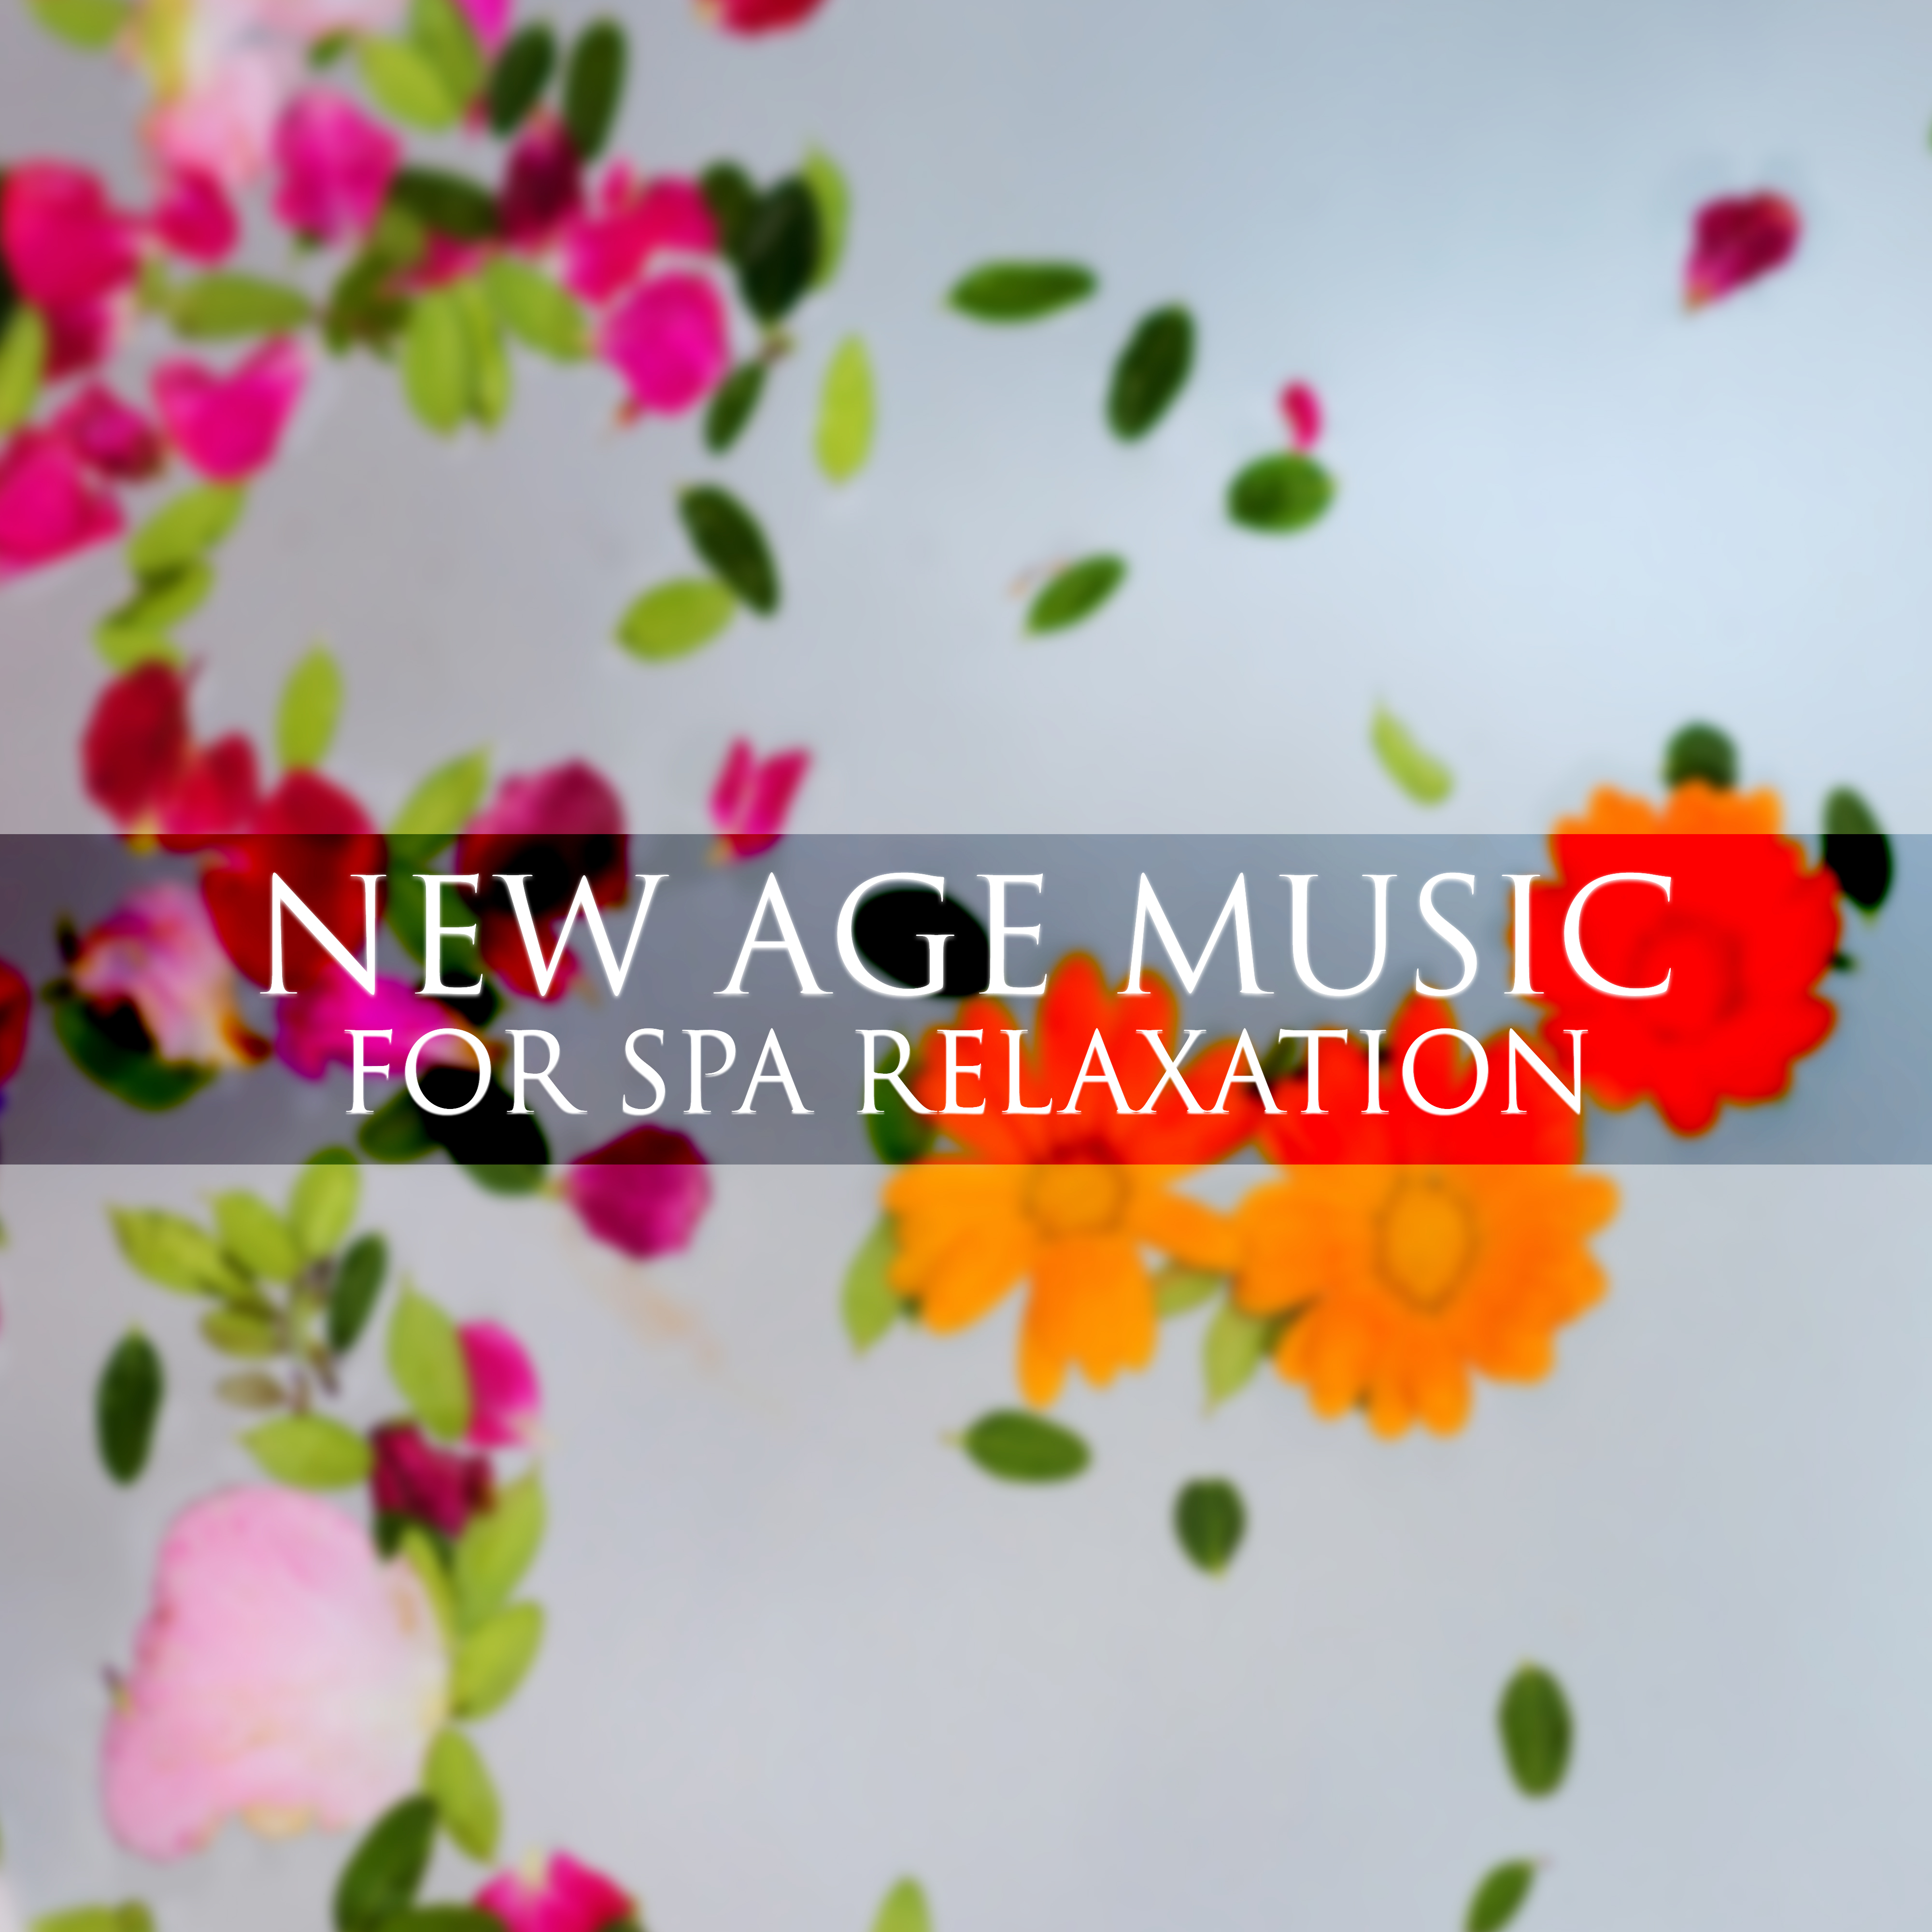 New Age Music for Spa Relaxation  Soft Relaxation, Healing Sounds, Music to Calm Down, Easy Listening, Spa Rest